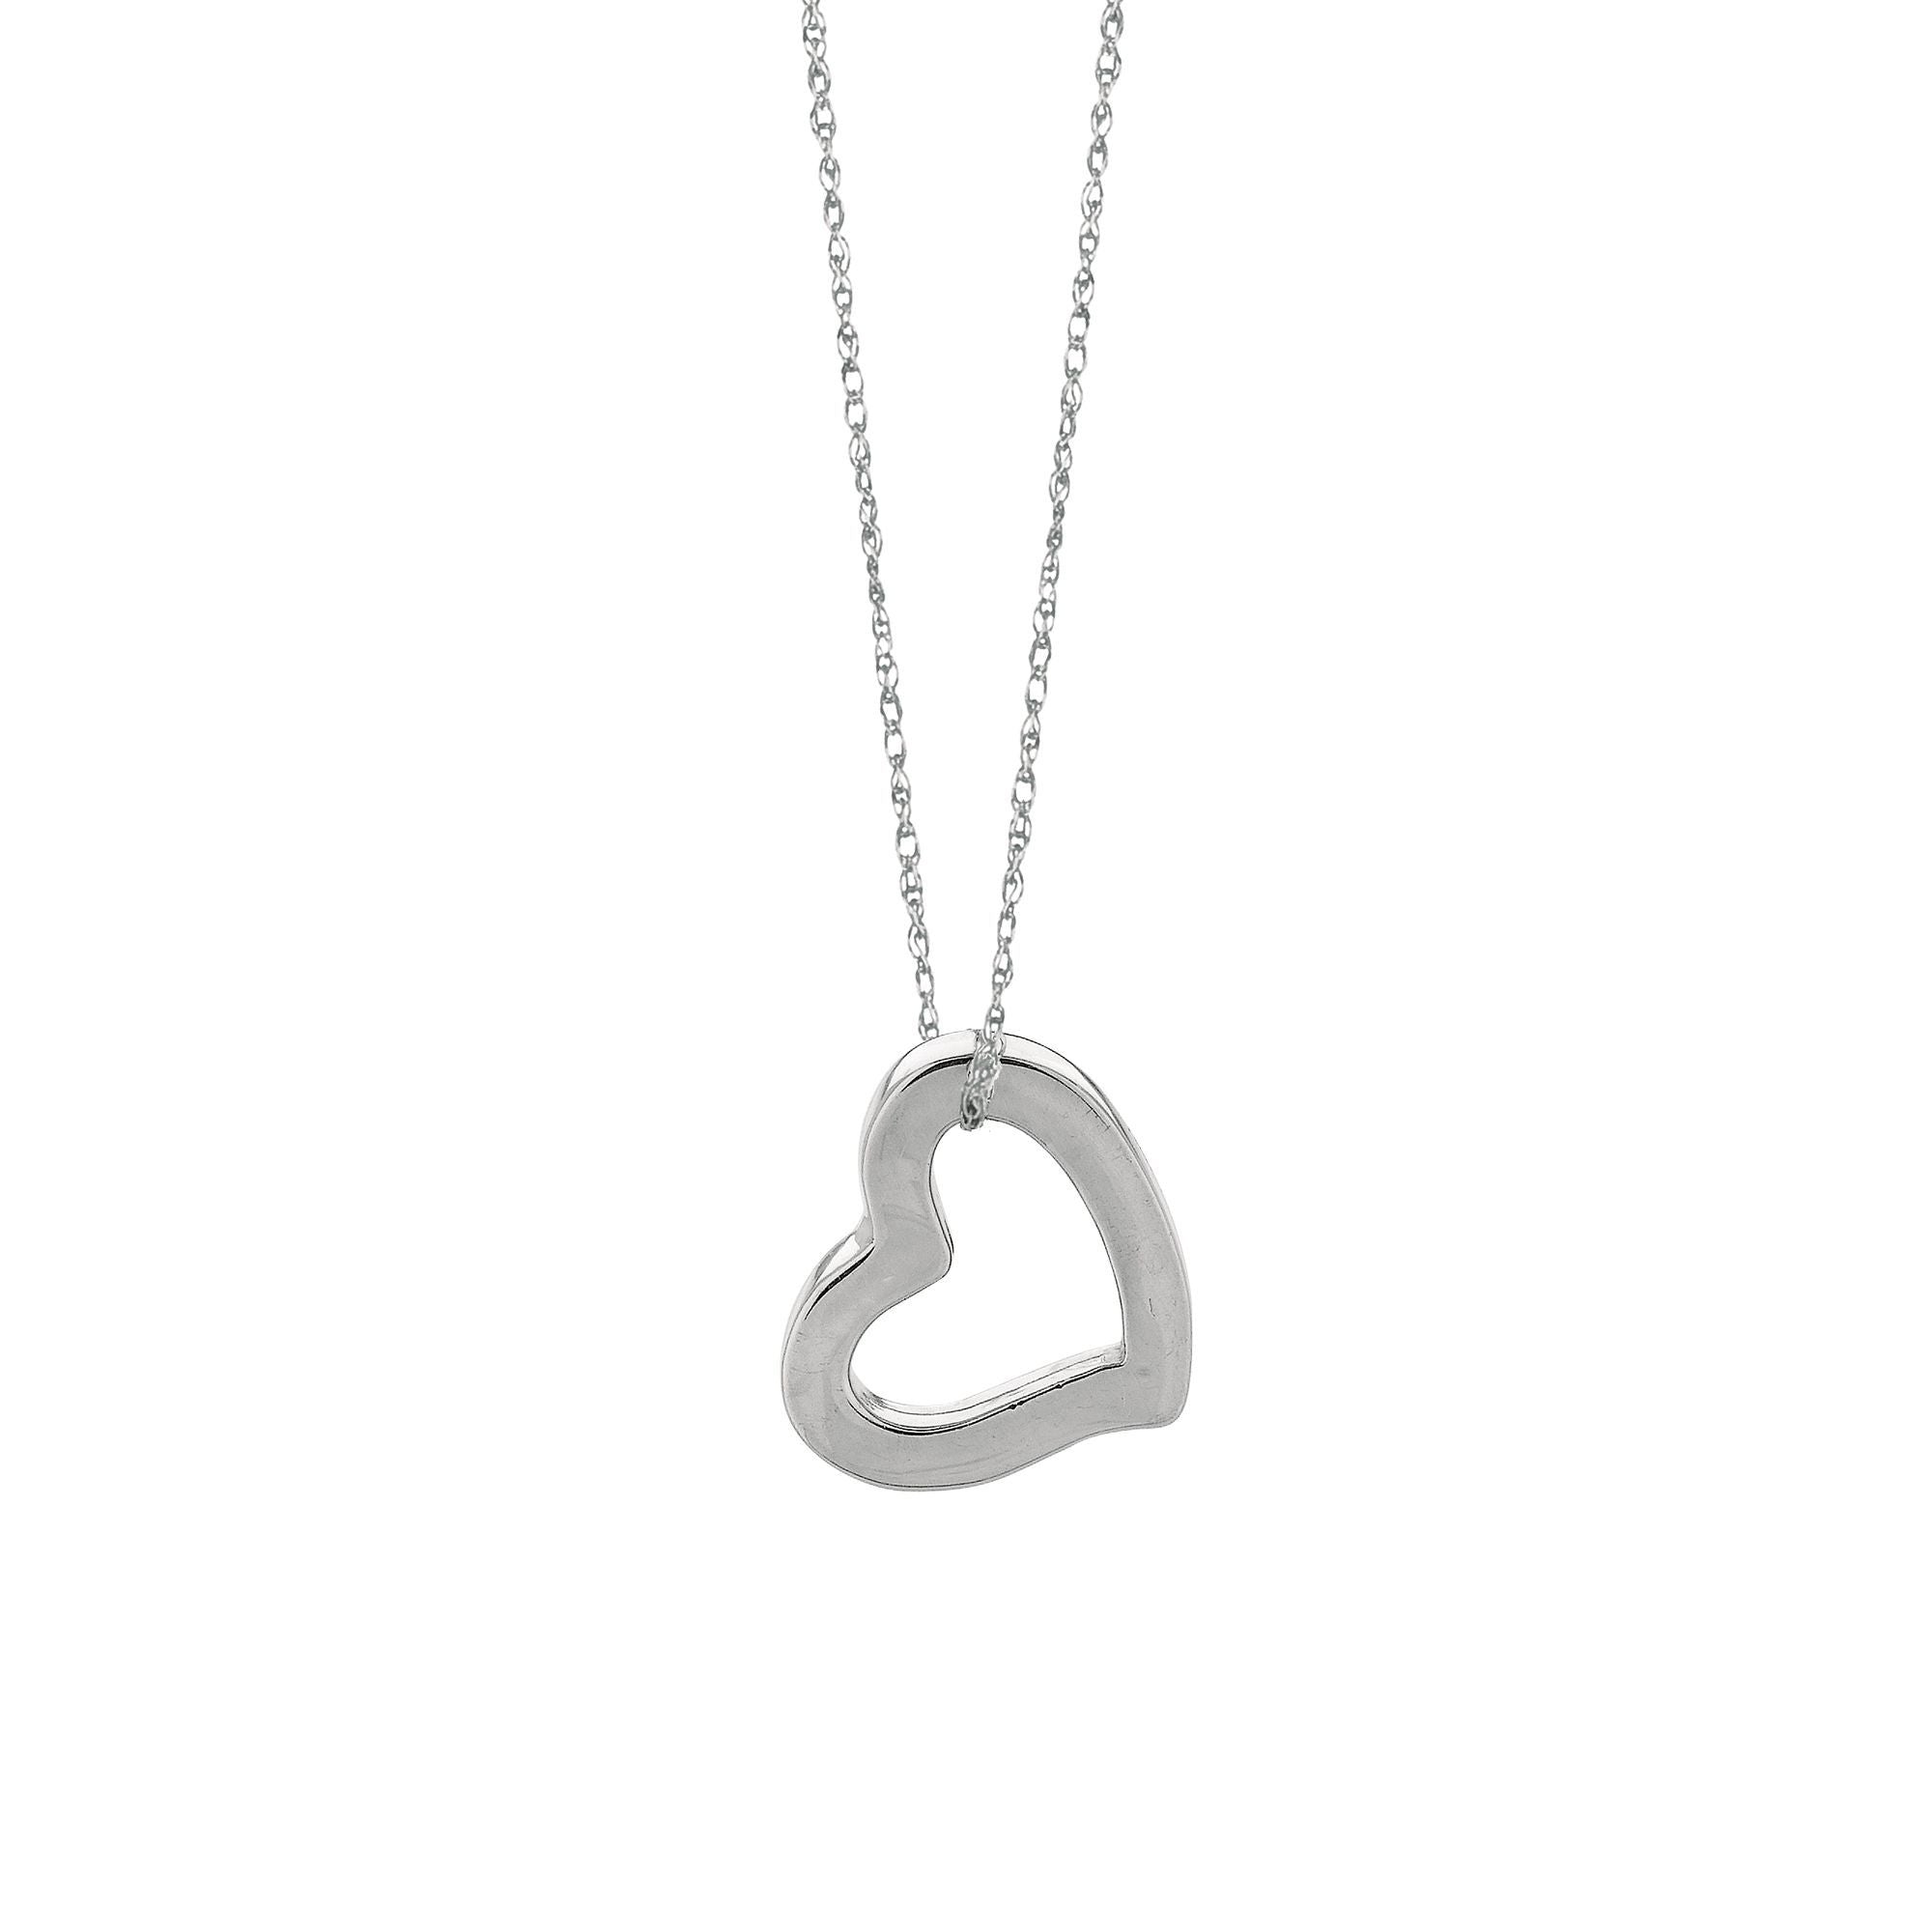 Minimalist Solid Gold Open Heart Necklace - wingroupjewelry